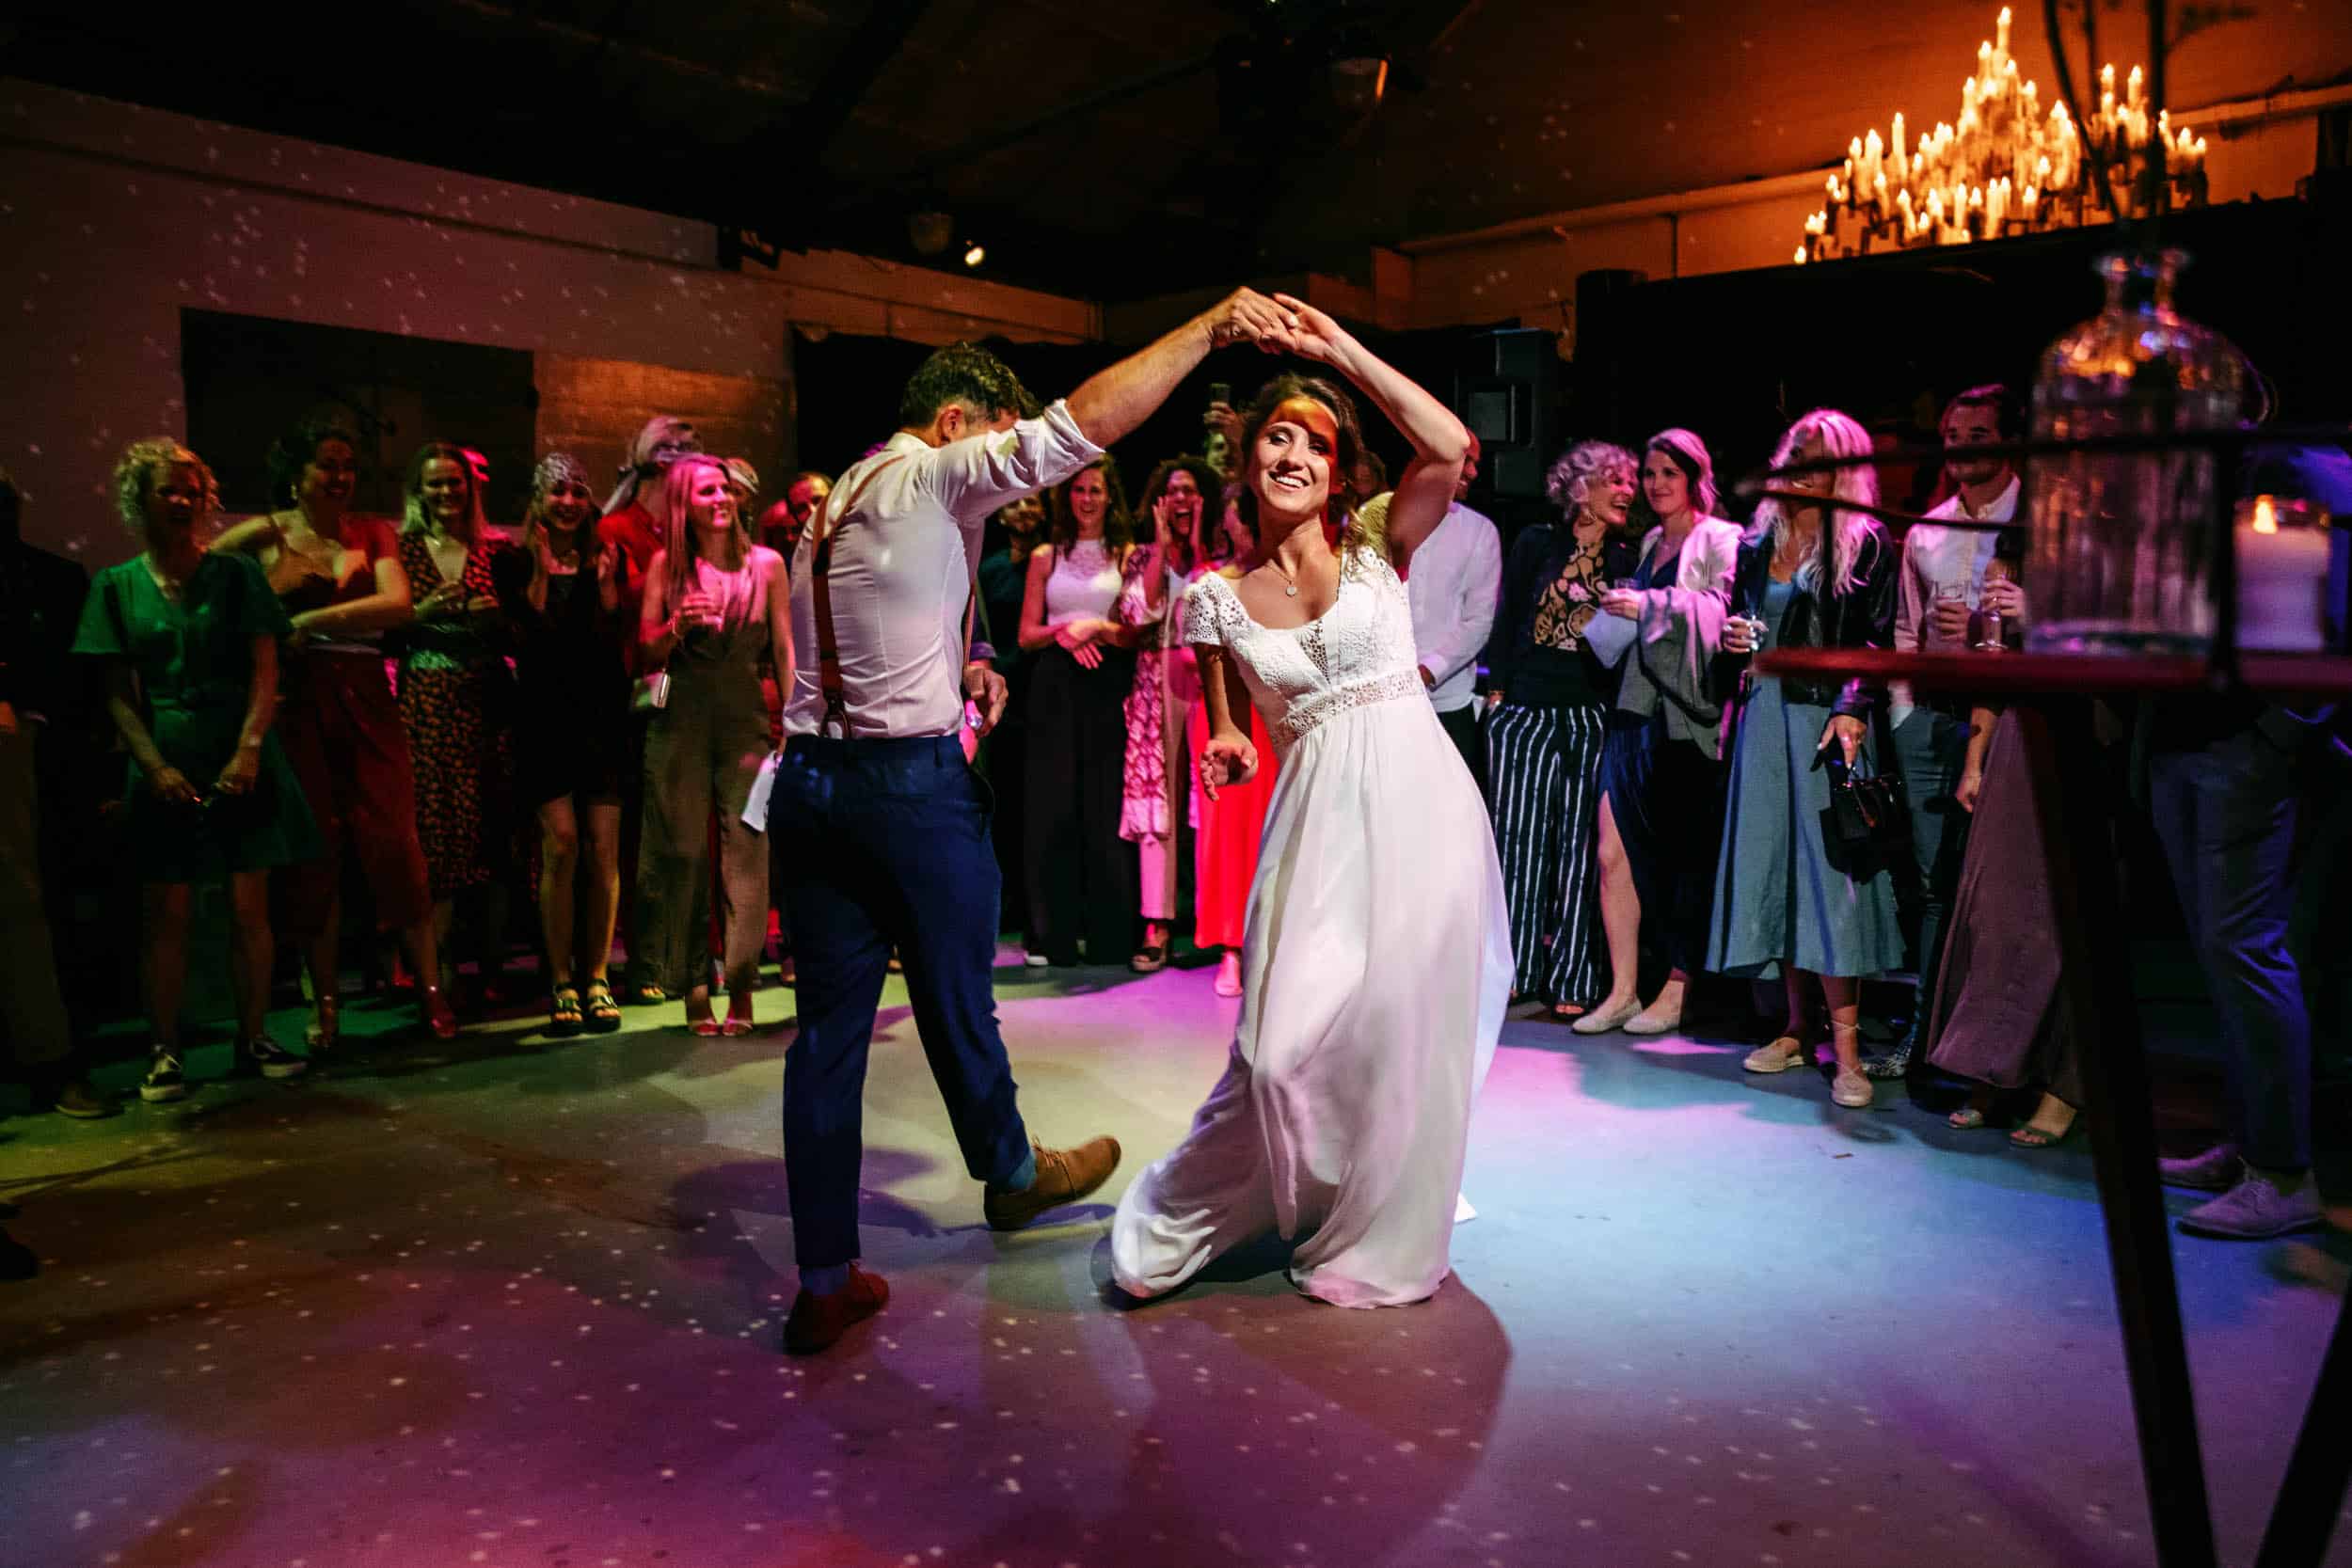 A bride and groom dance at a wedding reception.